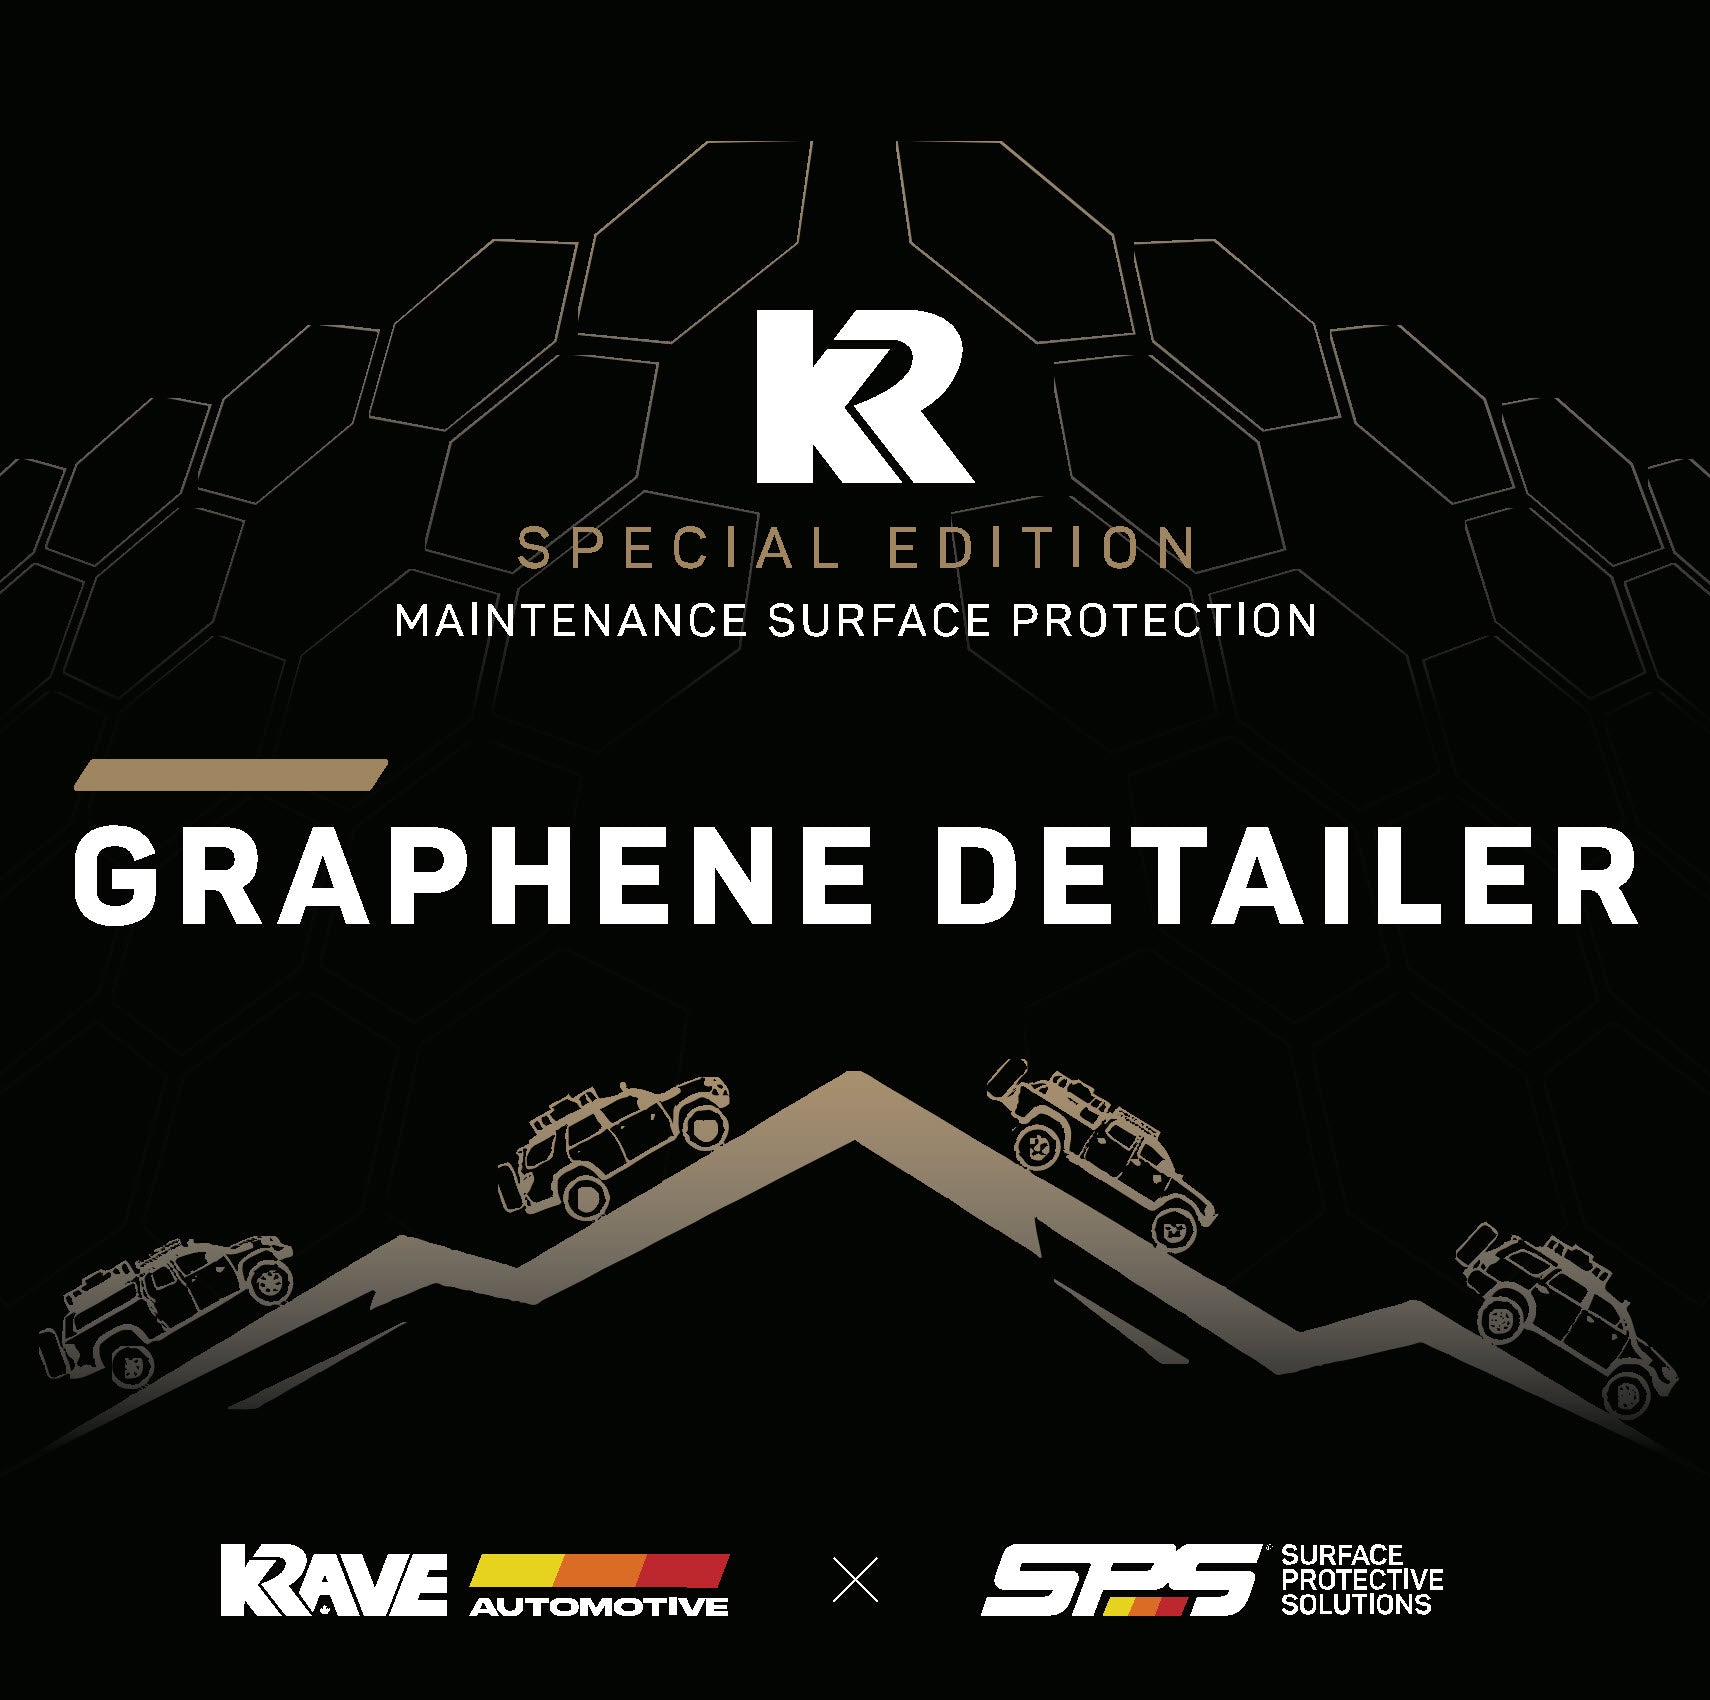 Surface Protective Solutions - Graphene Detailer